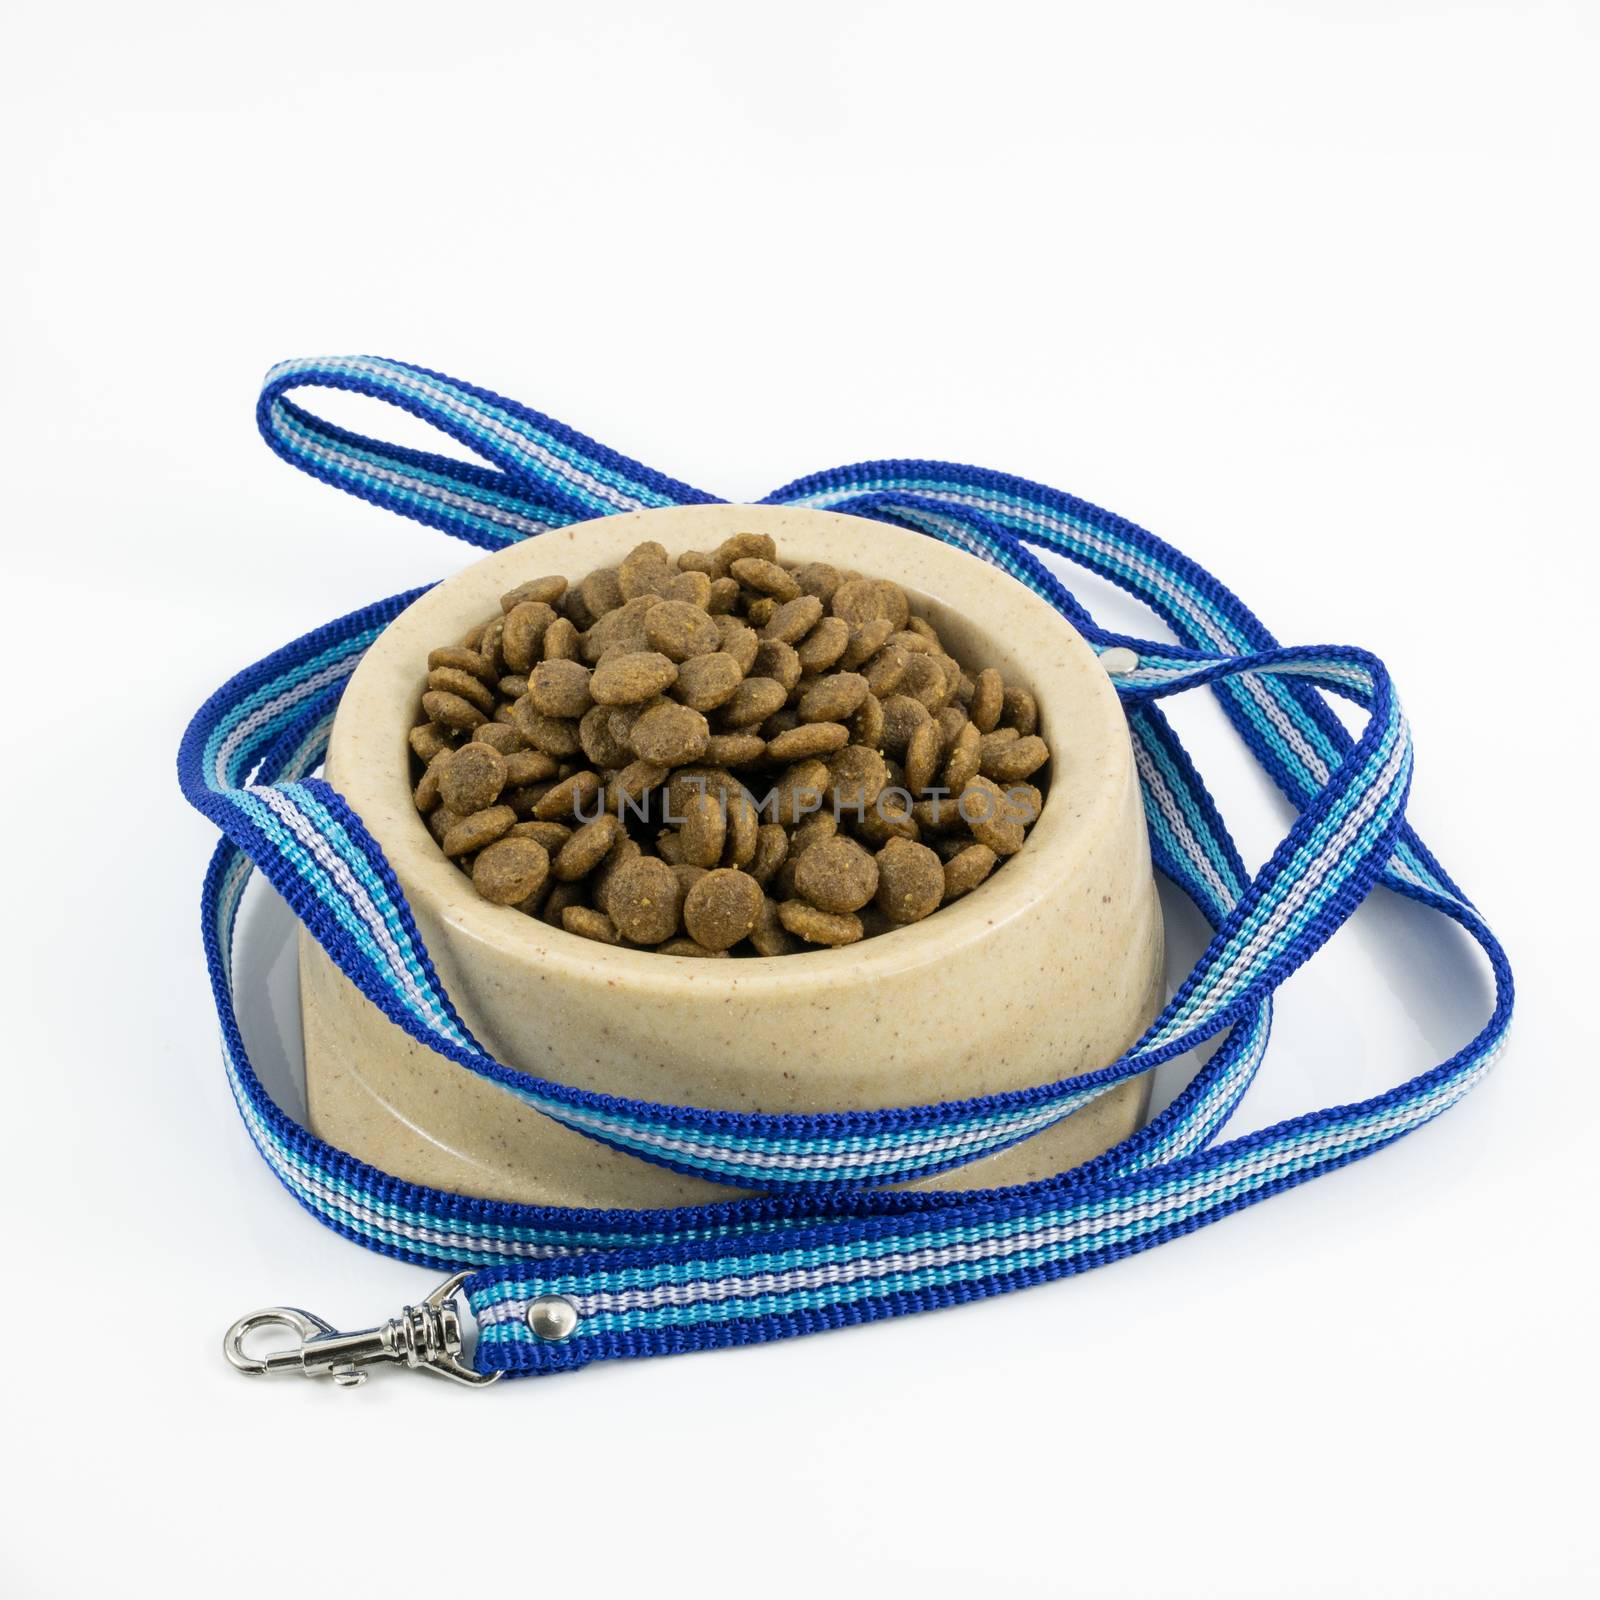 The close up of kibbles (dog food) in brown plastic dog bowl and blue nylon leash.